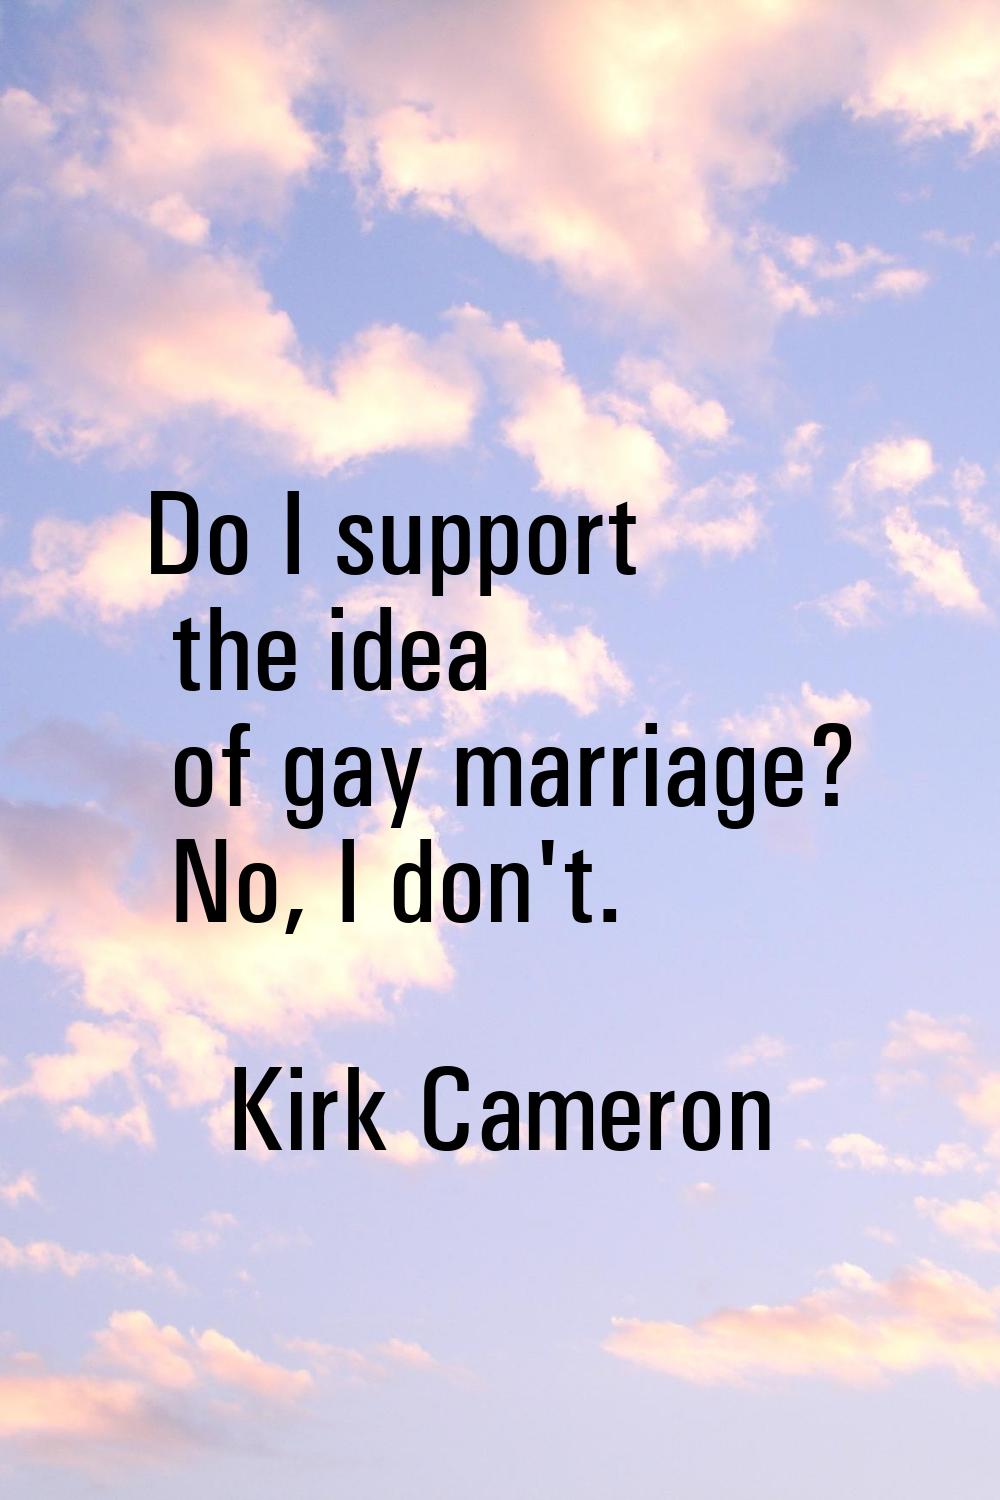 Do I support the idea of gay marriage? No, I don't.